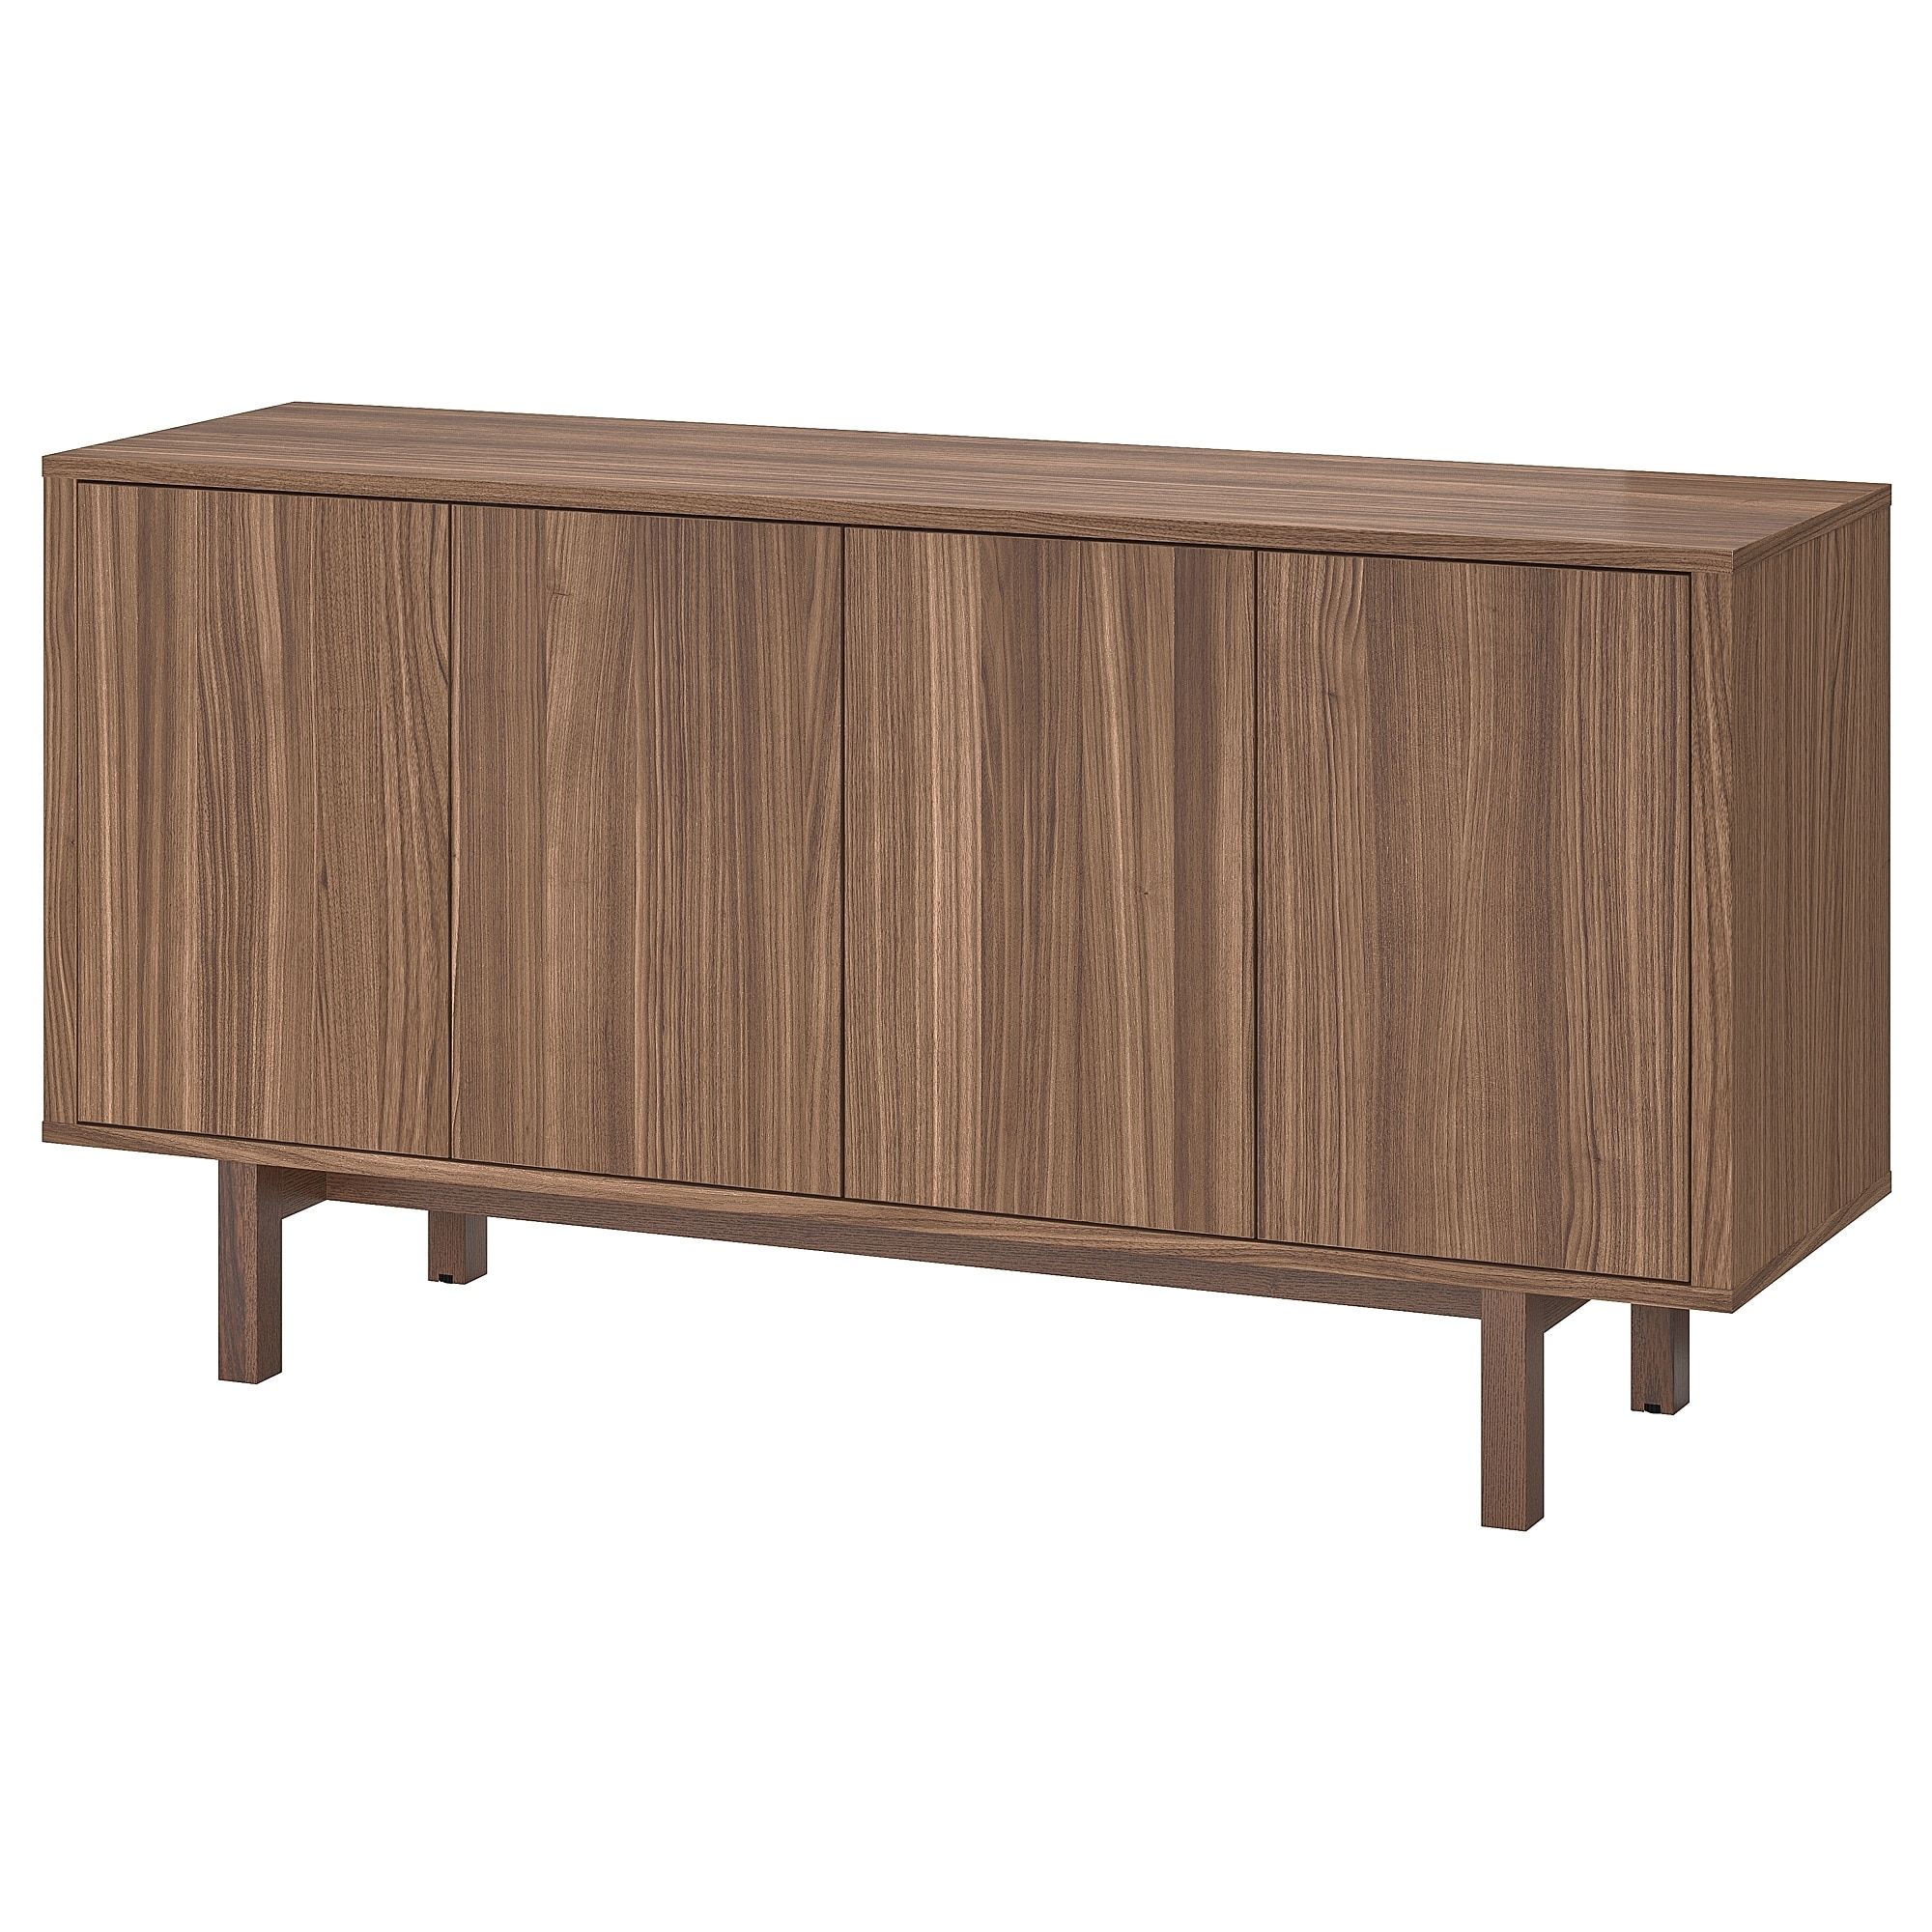 Stockholm Sideboard – Ikea Throughout Walnut Finish Contempo Sideboards (View 16 of 30)